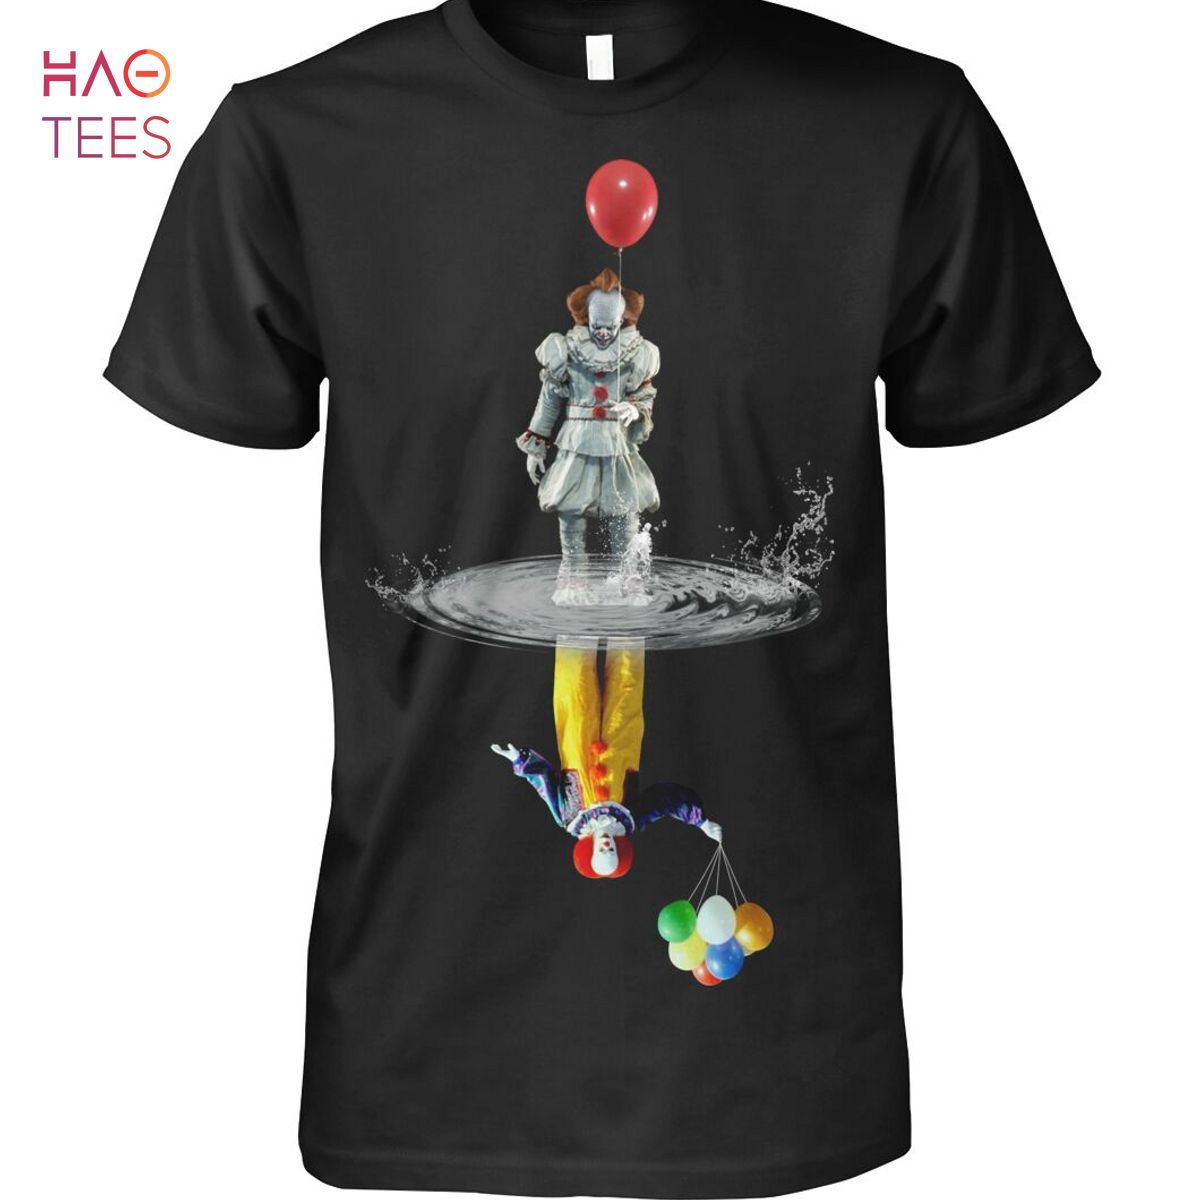 HOT Pennywise Shirt Limited Edition